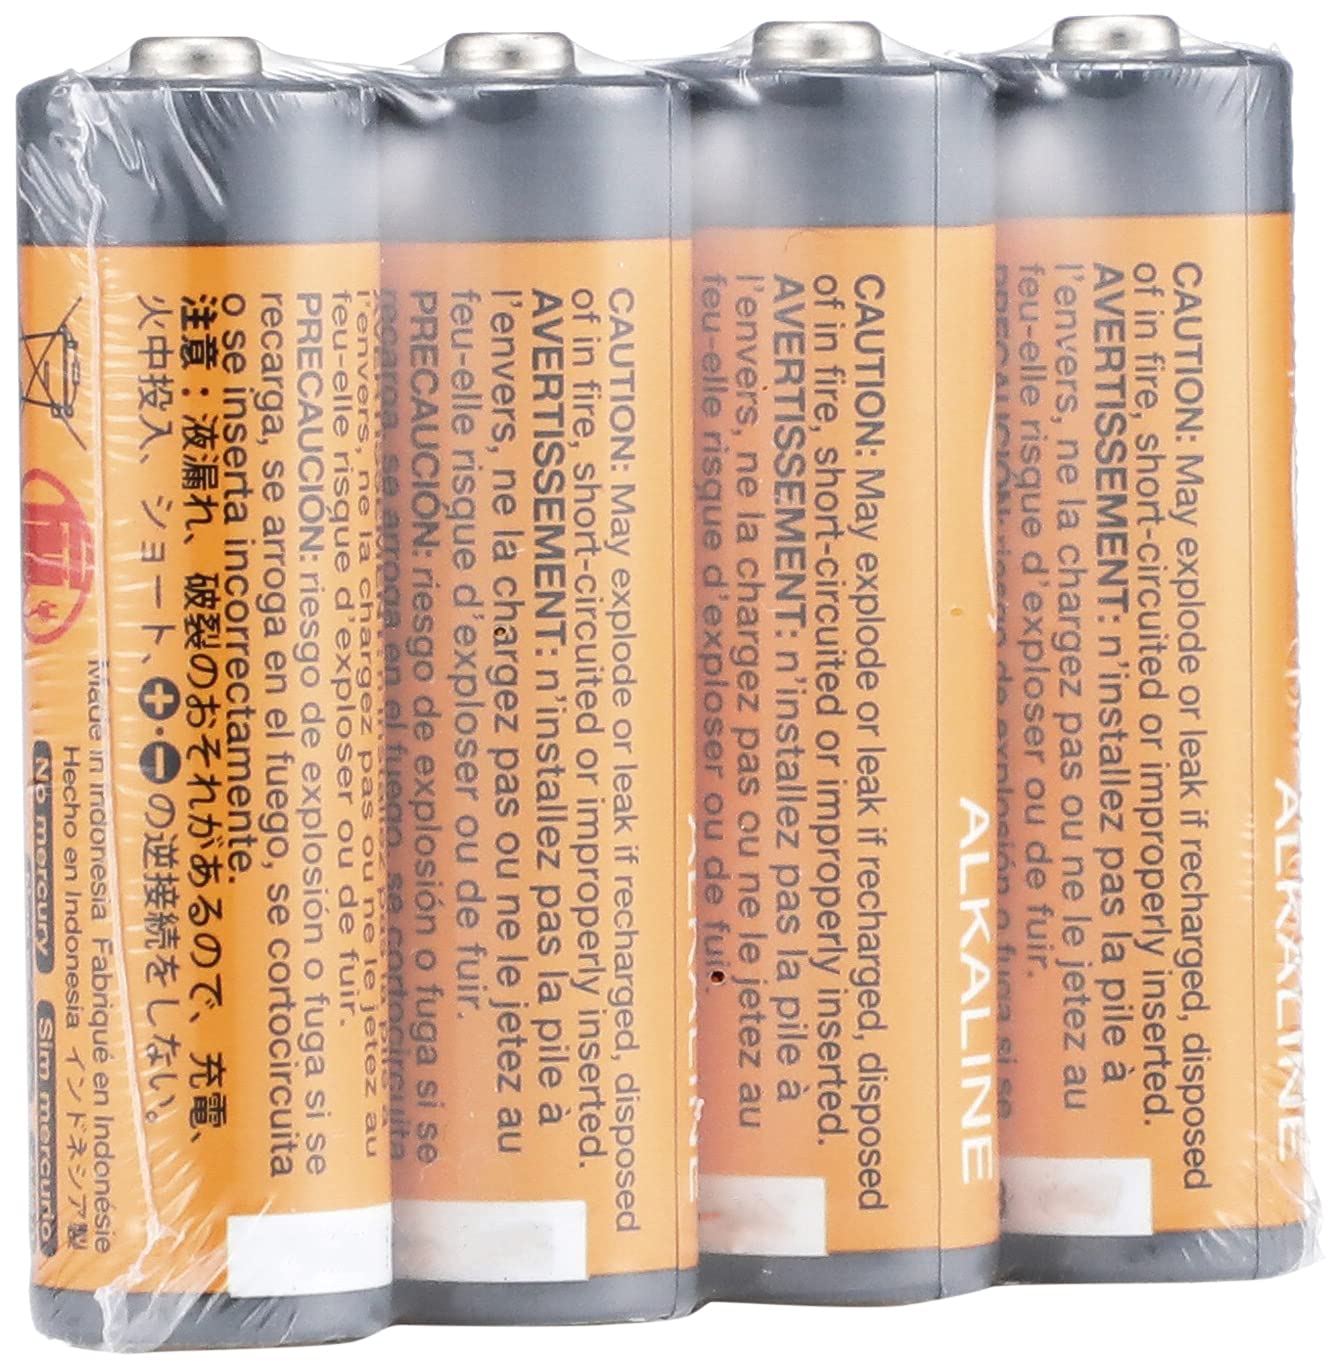 Amazon Basics Alkaline Battery Combo Pack | AA 48-Pack, C Cell 12-Pack (May Ship Separately)